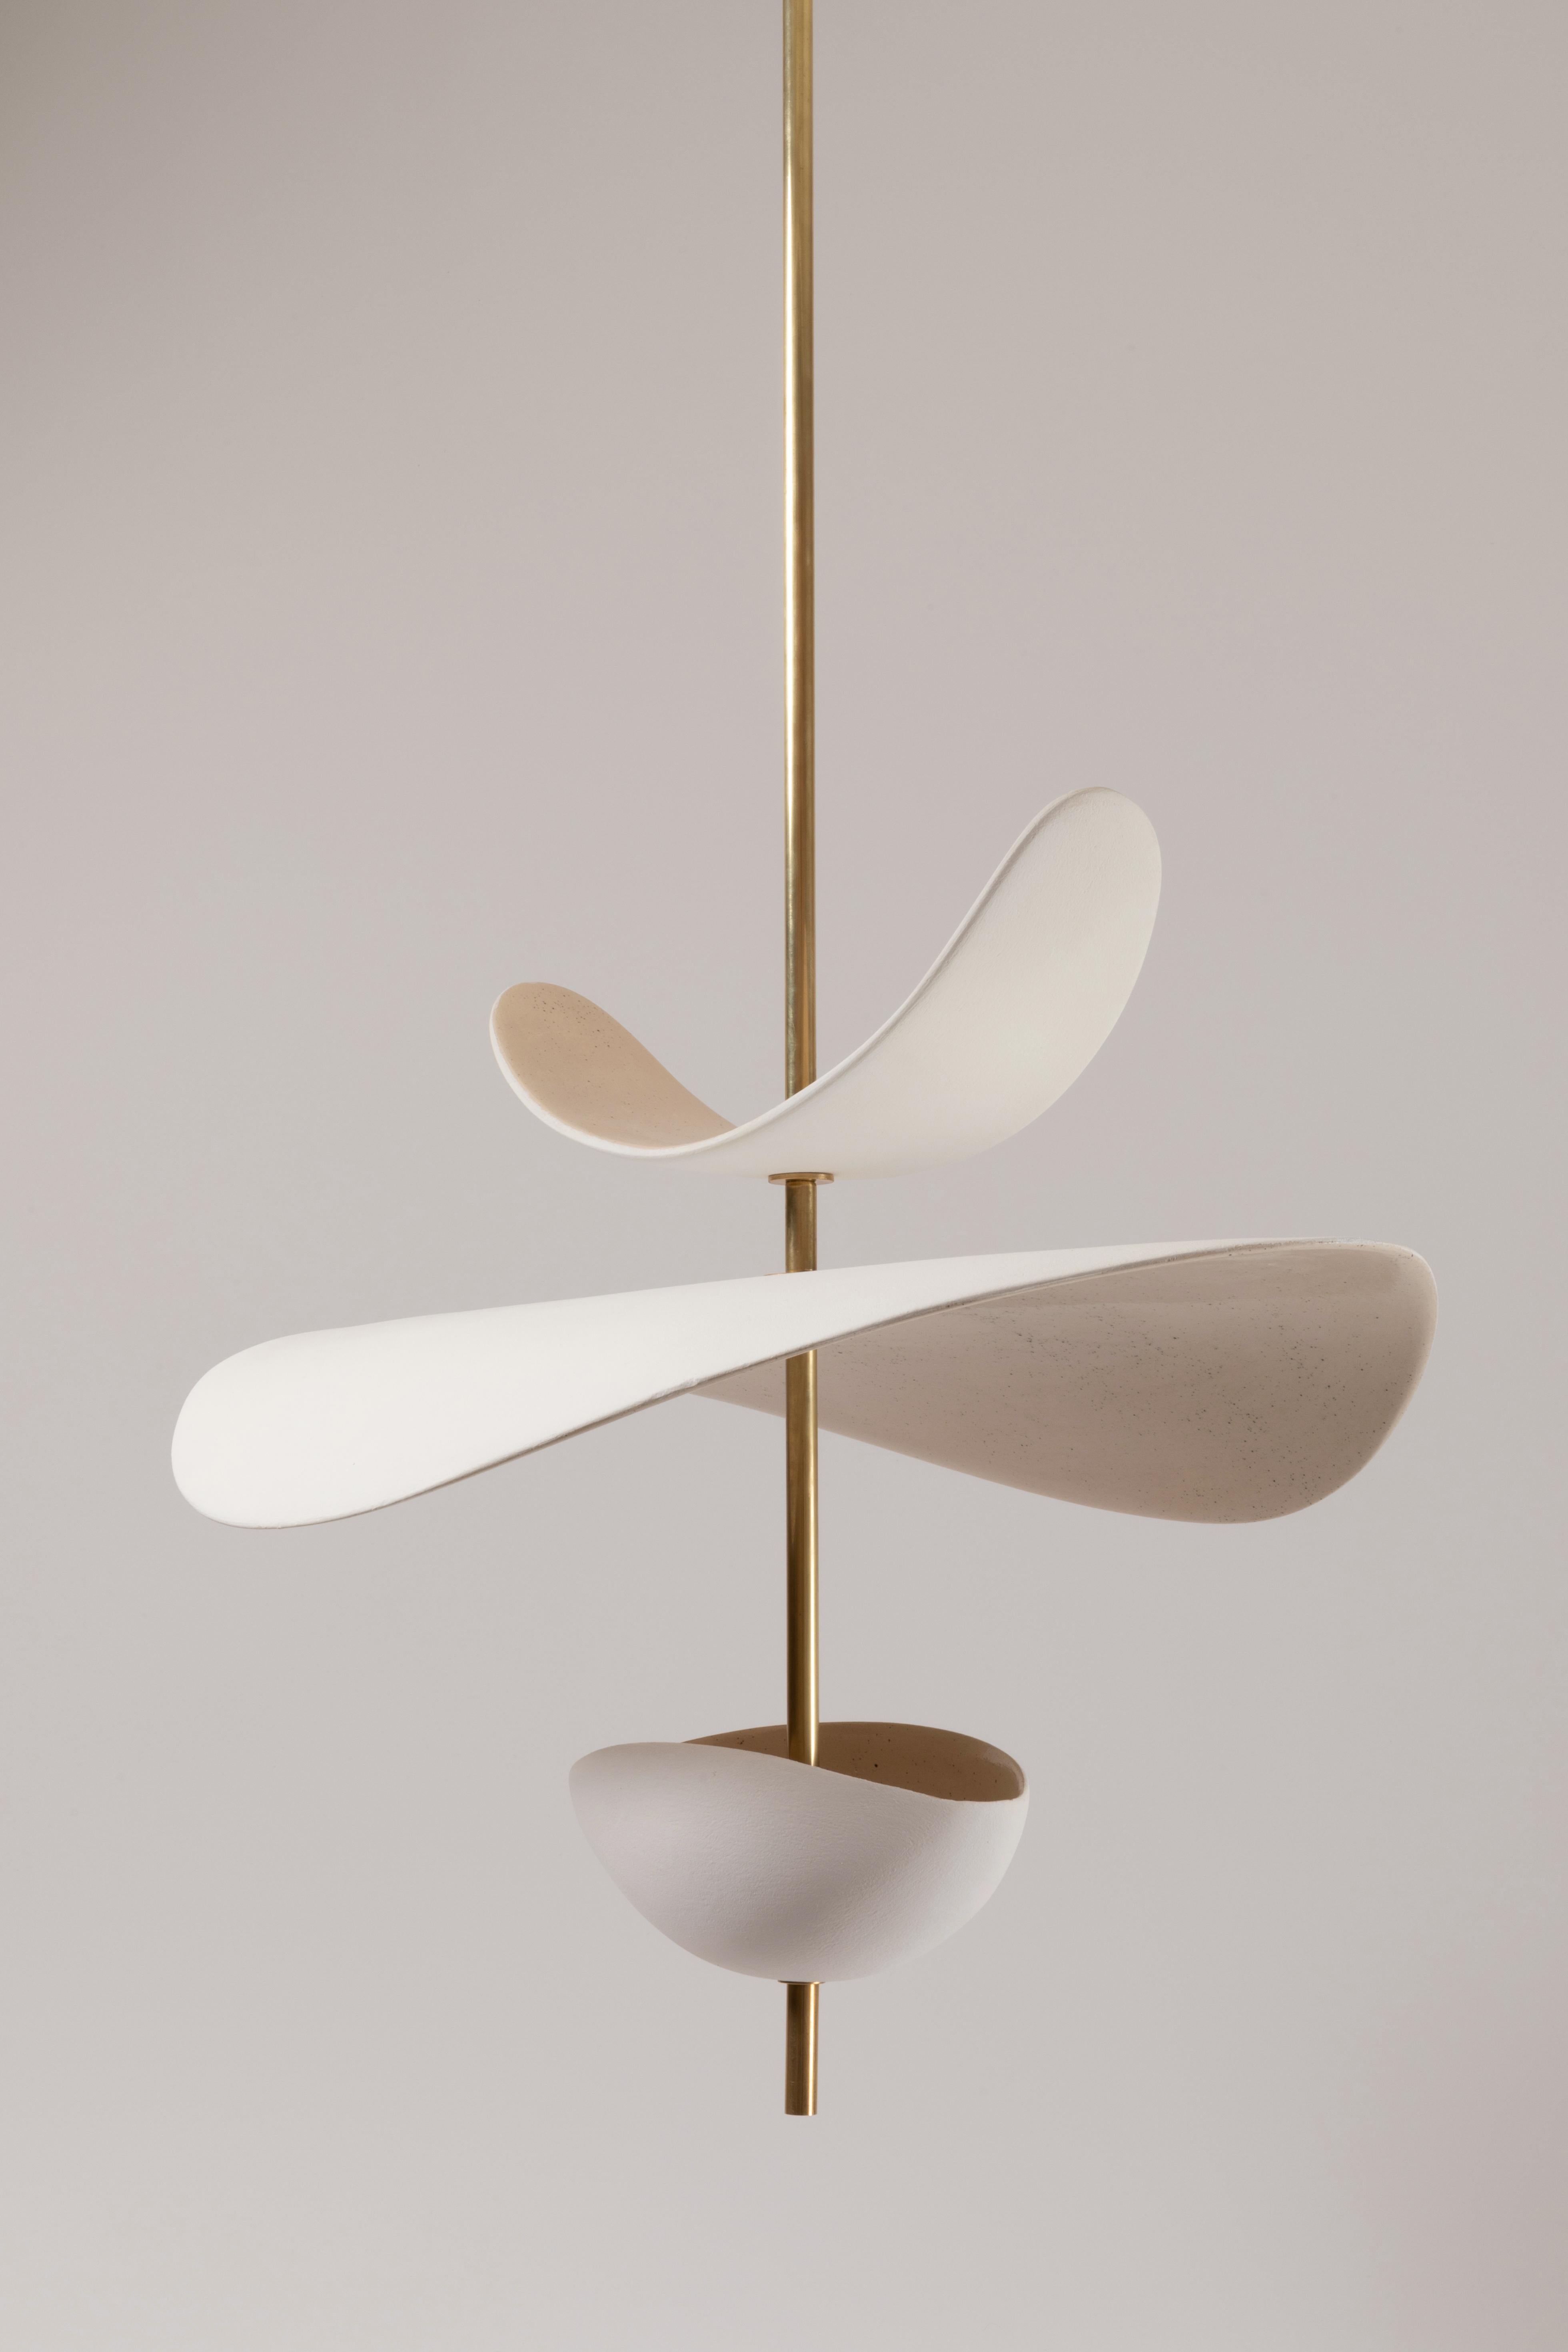 Free Form A pendant by Elsa Foulon
Dimensions: D 75 x H 65 cm 
Materials: Ceramic, Brass
Unique Piece
Also available in different options: Bowl or Cup (lower part).
The height is min 65 cm and customizable to the customer's size. 

All our lamps can